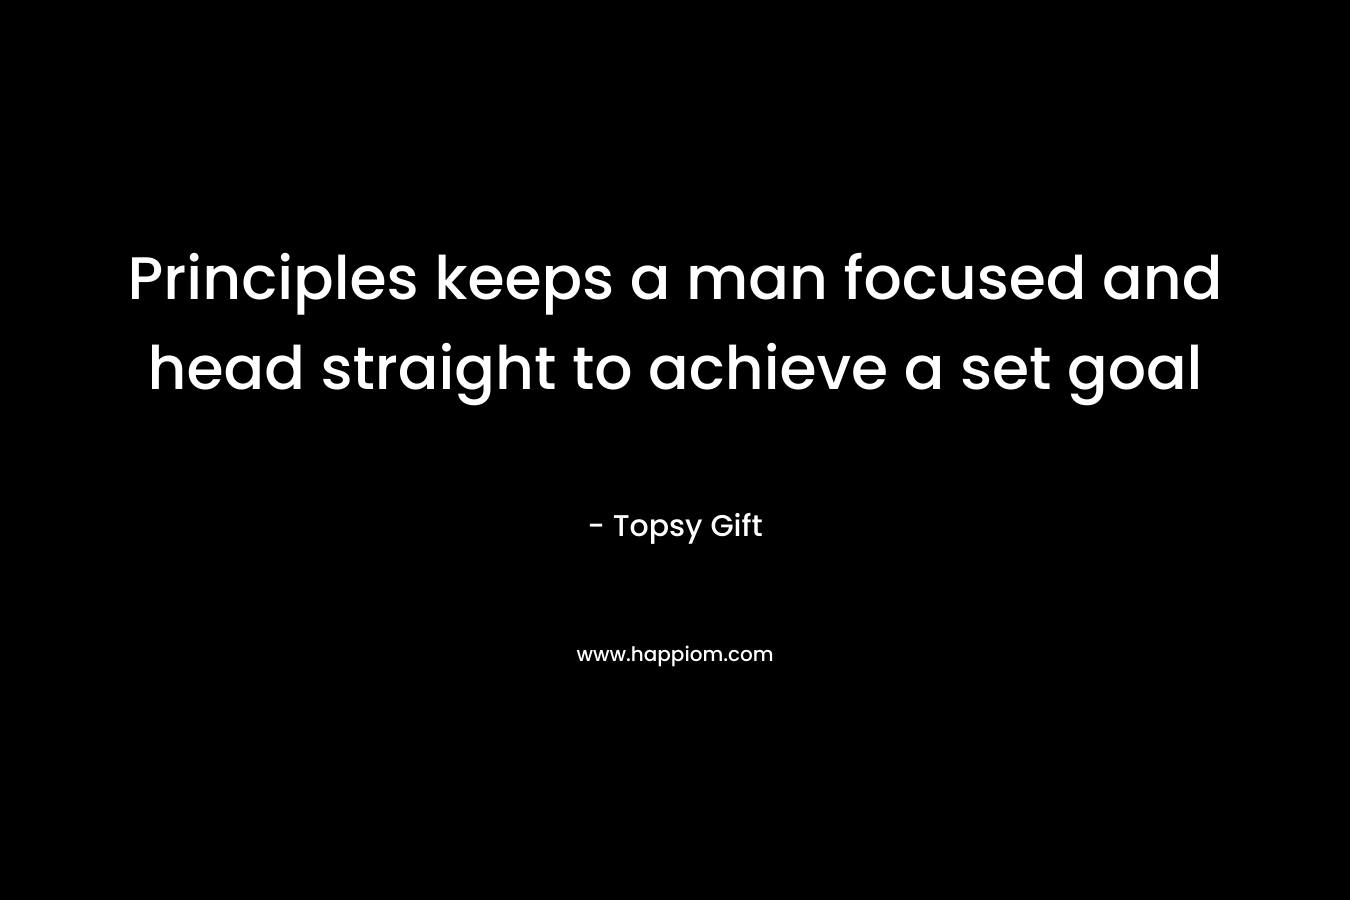 Principles keeps a man focused and head straight to achieve a set goal – Topsy Gift